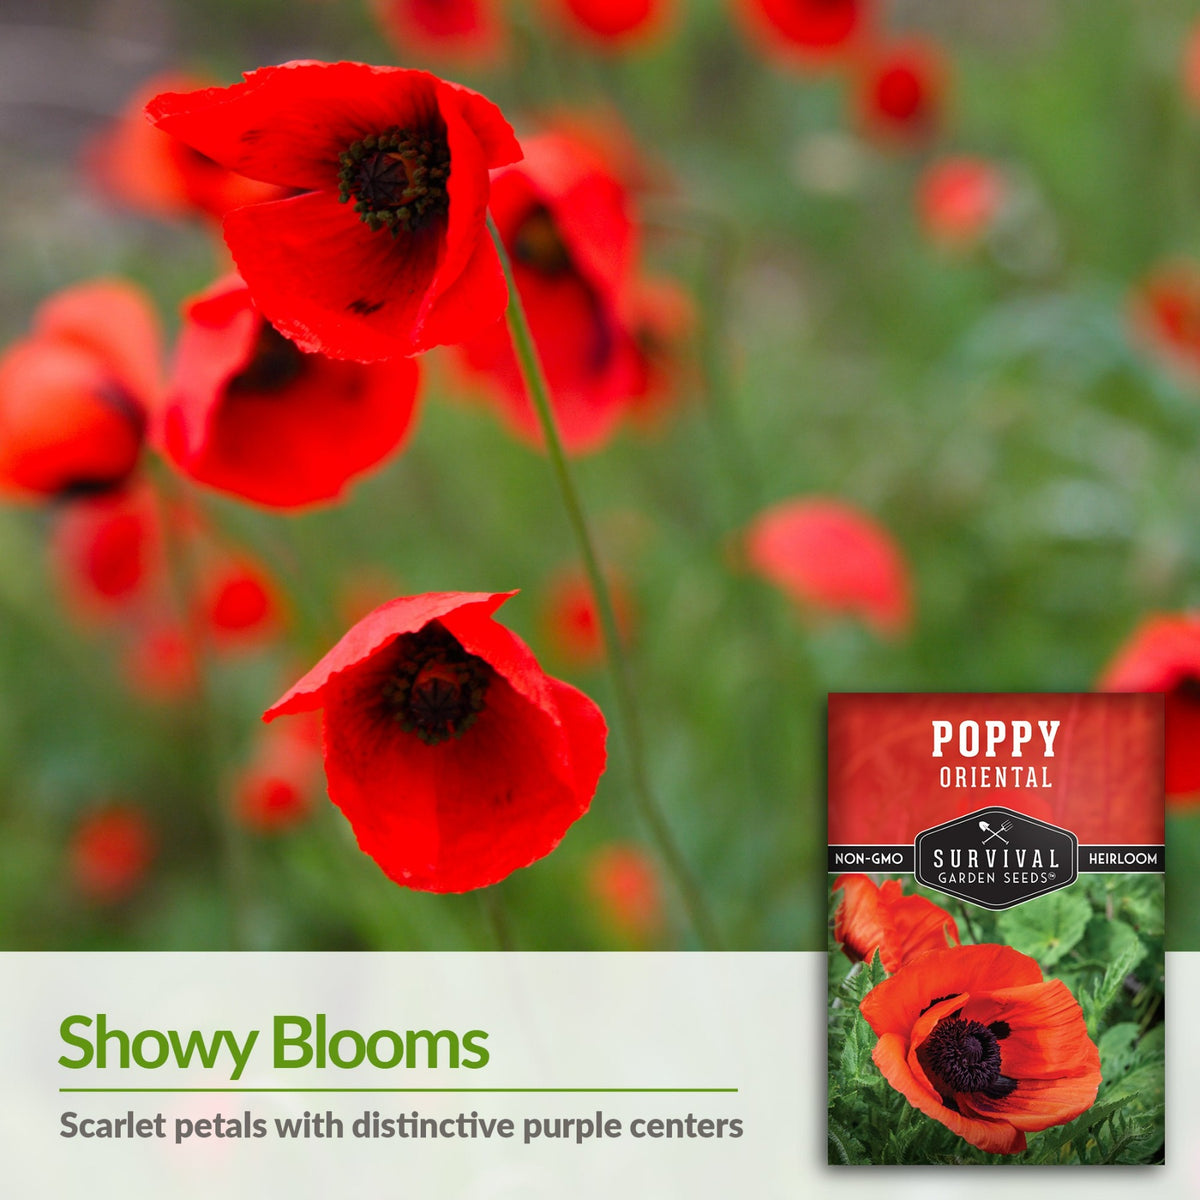 Poppies have showy blooms with scarlet petals and purple centers